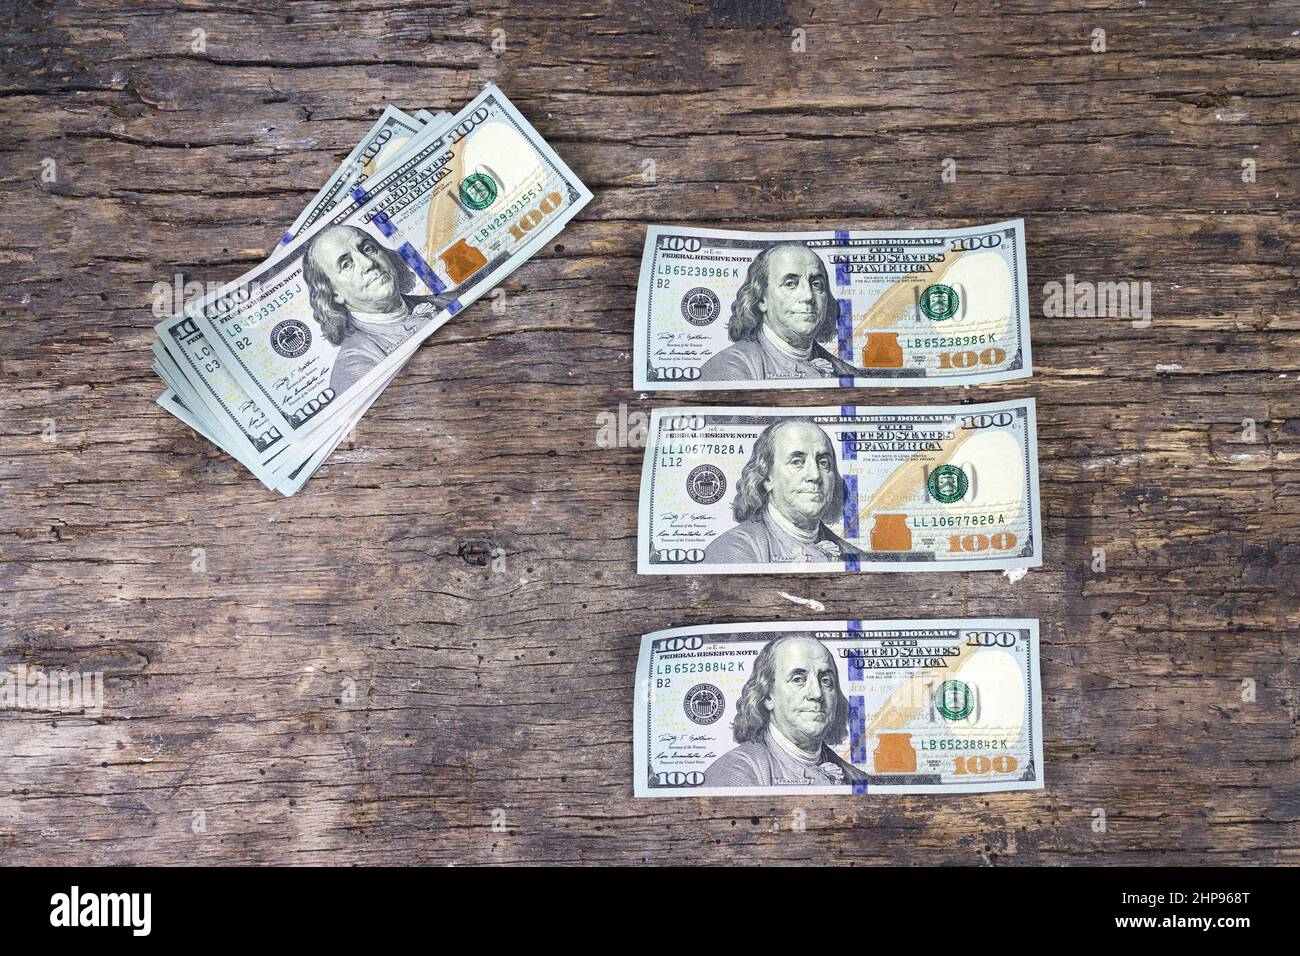 Illegal production of US dollars. United States dollars fake banknotes. One hundred American dollars bills Stock Photo